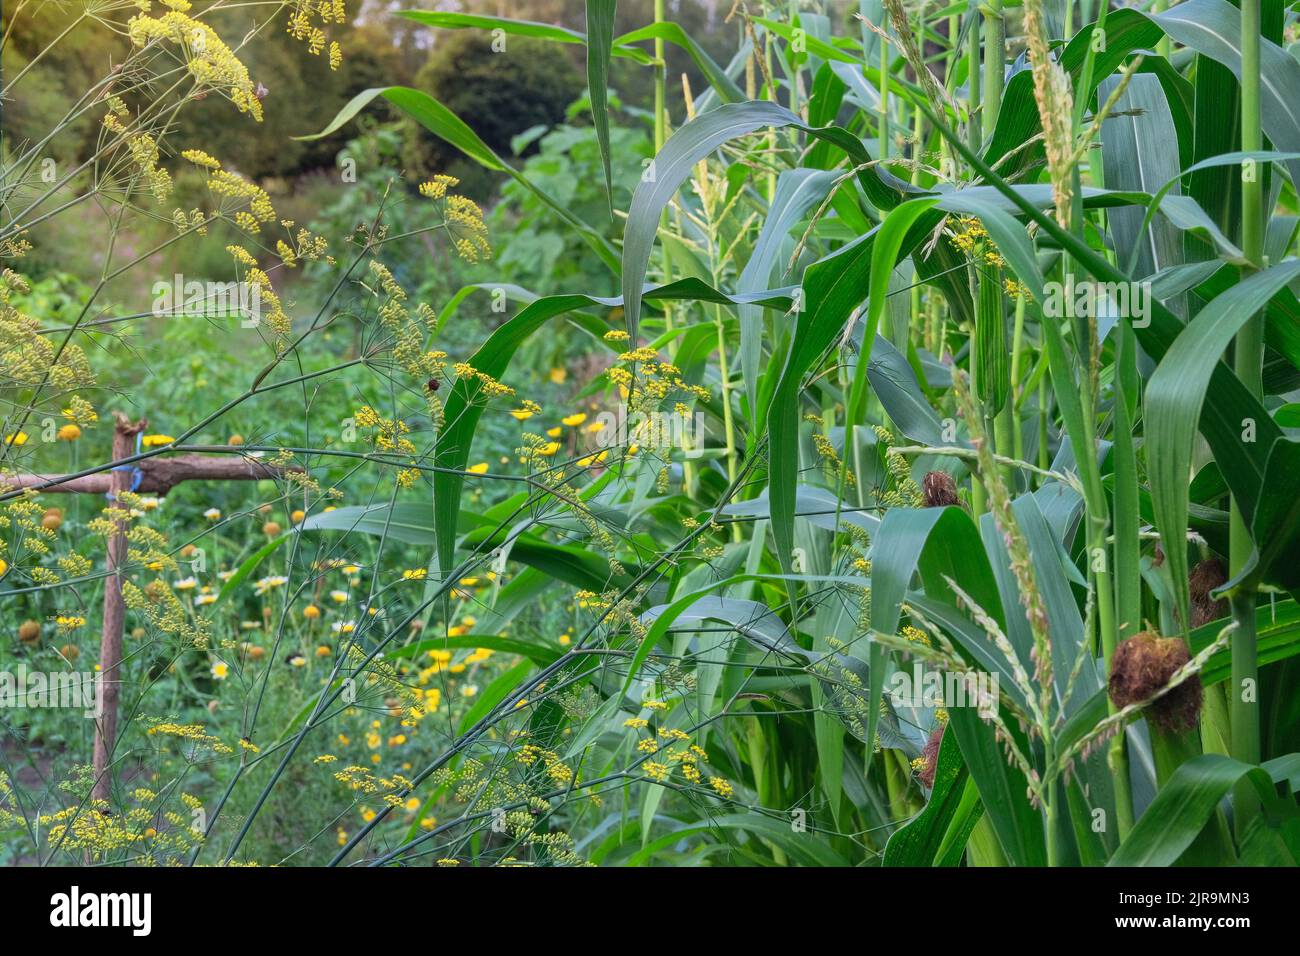 Corn is growing in rustic garden. Organic sweet corn in farming and harvesting. Growing vegetables at home in farming. Stock Photo